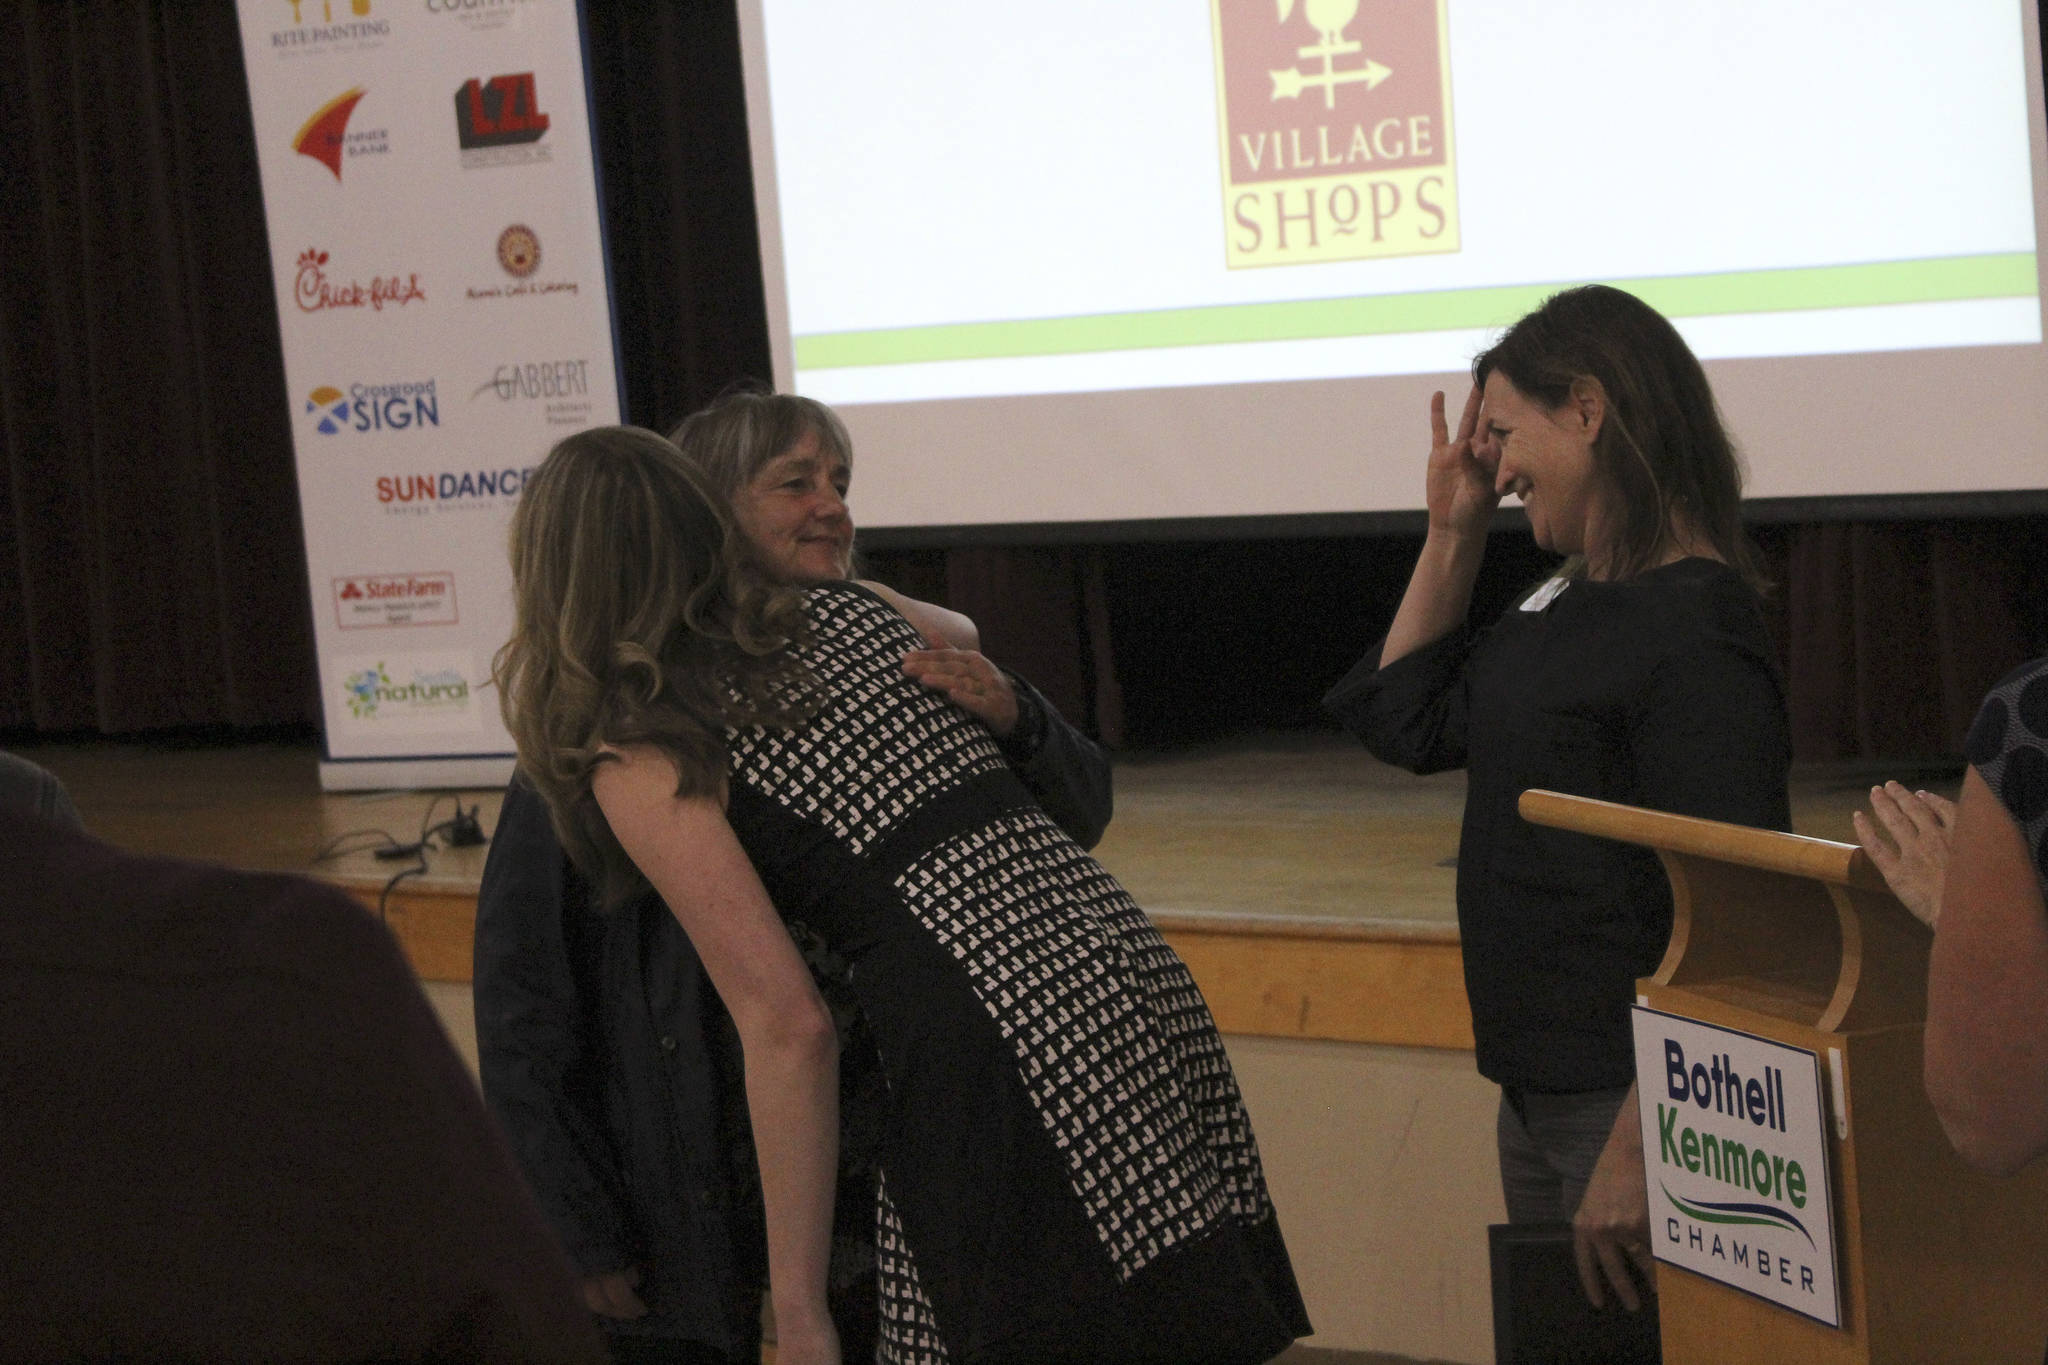 Maurita Colburn, the chamber’s Member and Community Relations manager, welcomes Country Village owner Leeann Tesorieri as she receives a standing ovation from local business owners. Kailan Manandic/staff photo